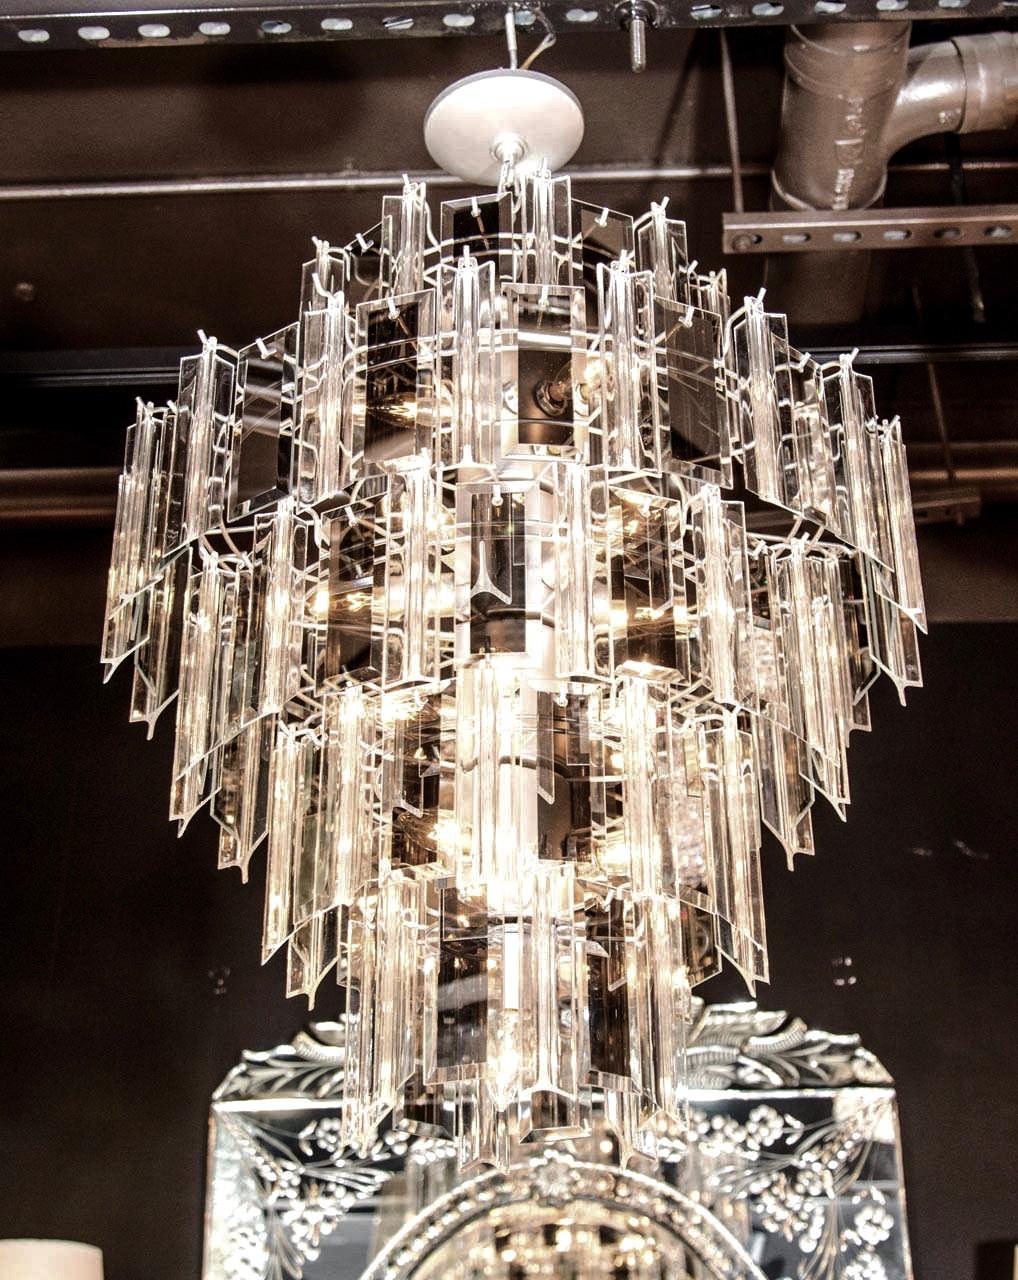 1970s five tier chandelier with alternating mirrored glass and Lucite prisms. Rectangular glass prisms have hand beveled borders with stunning smoked mirrored centers. Lucite triedre (three sided) prisms are beveled and have angled asymmetrical